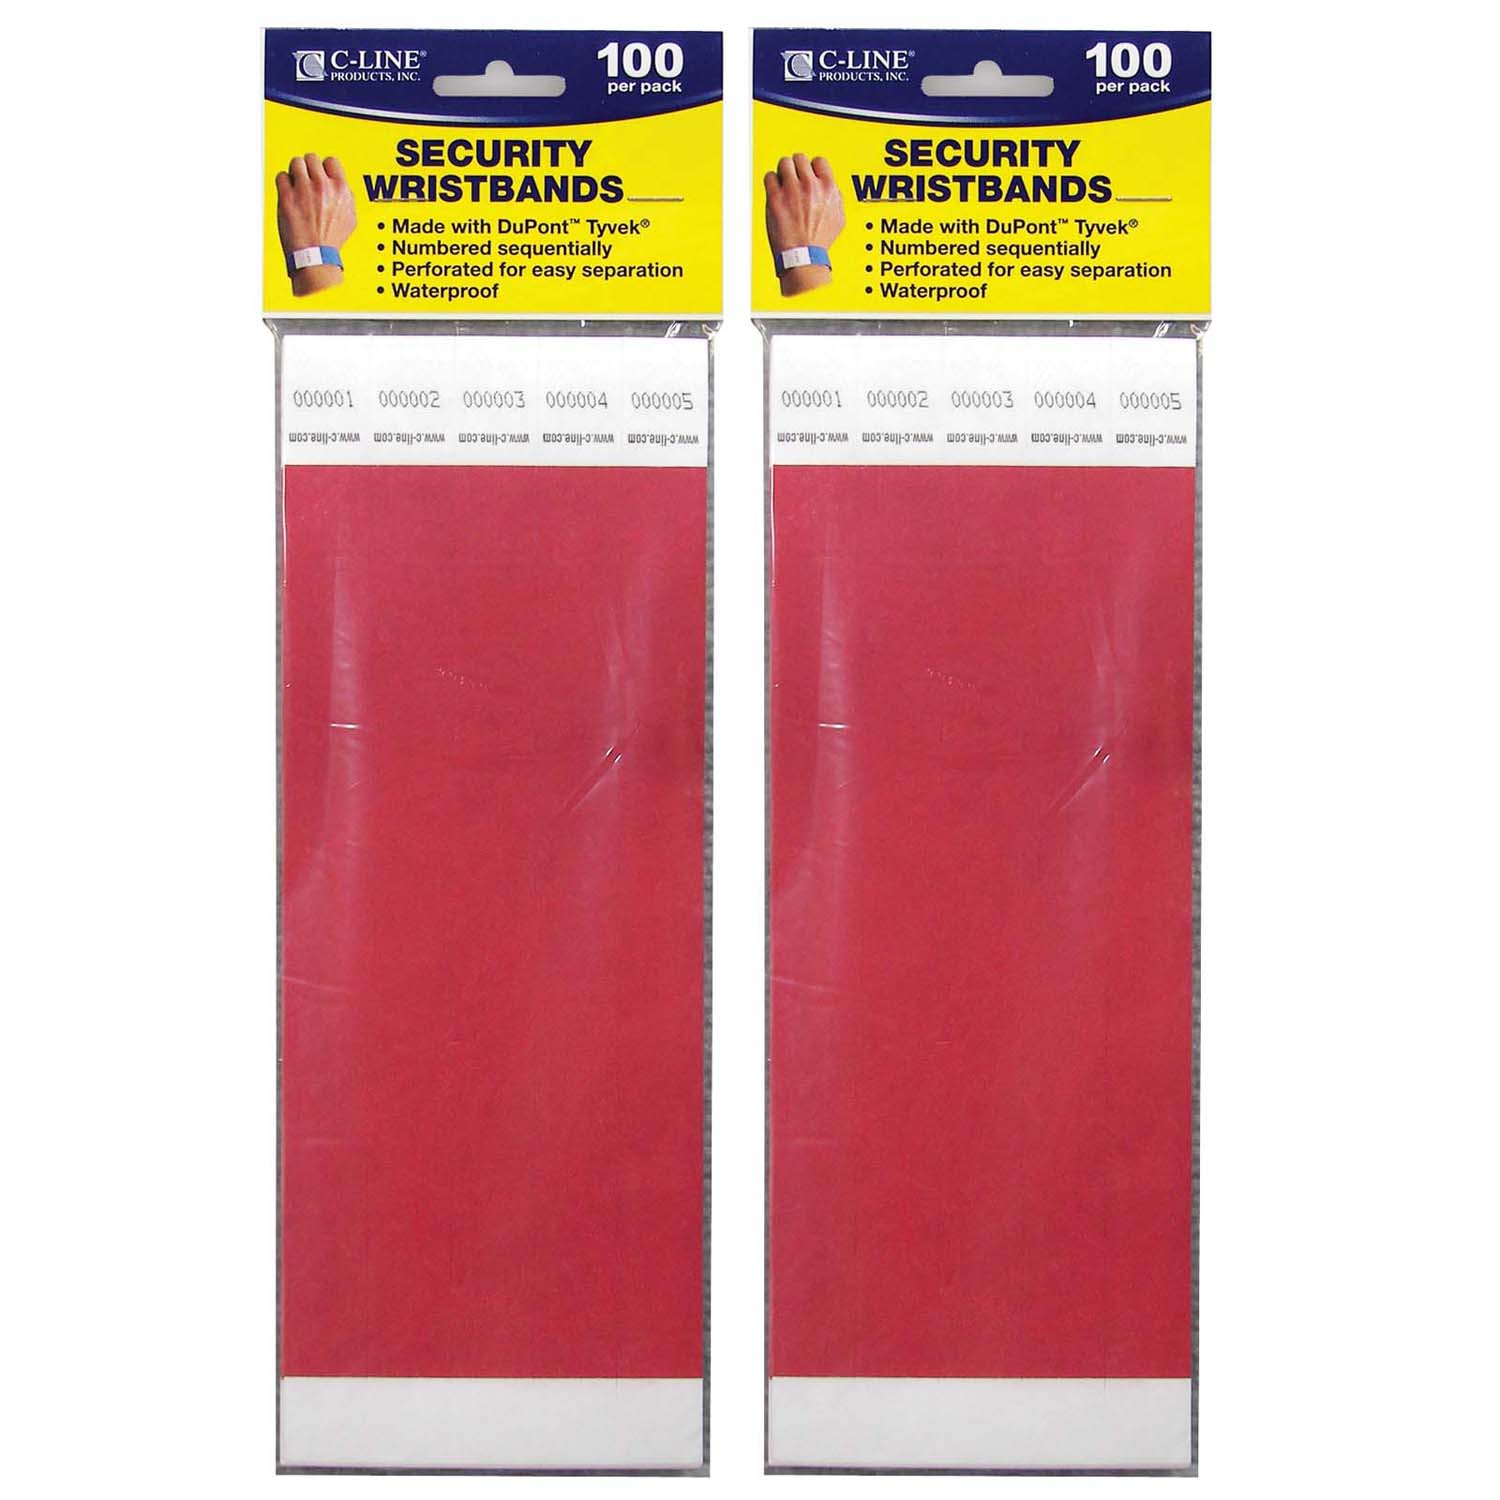 DuPont Tyvek Security Wristbands, Red, 100 Per Pack, 2 Packs